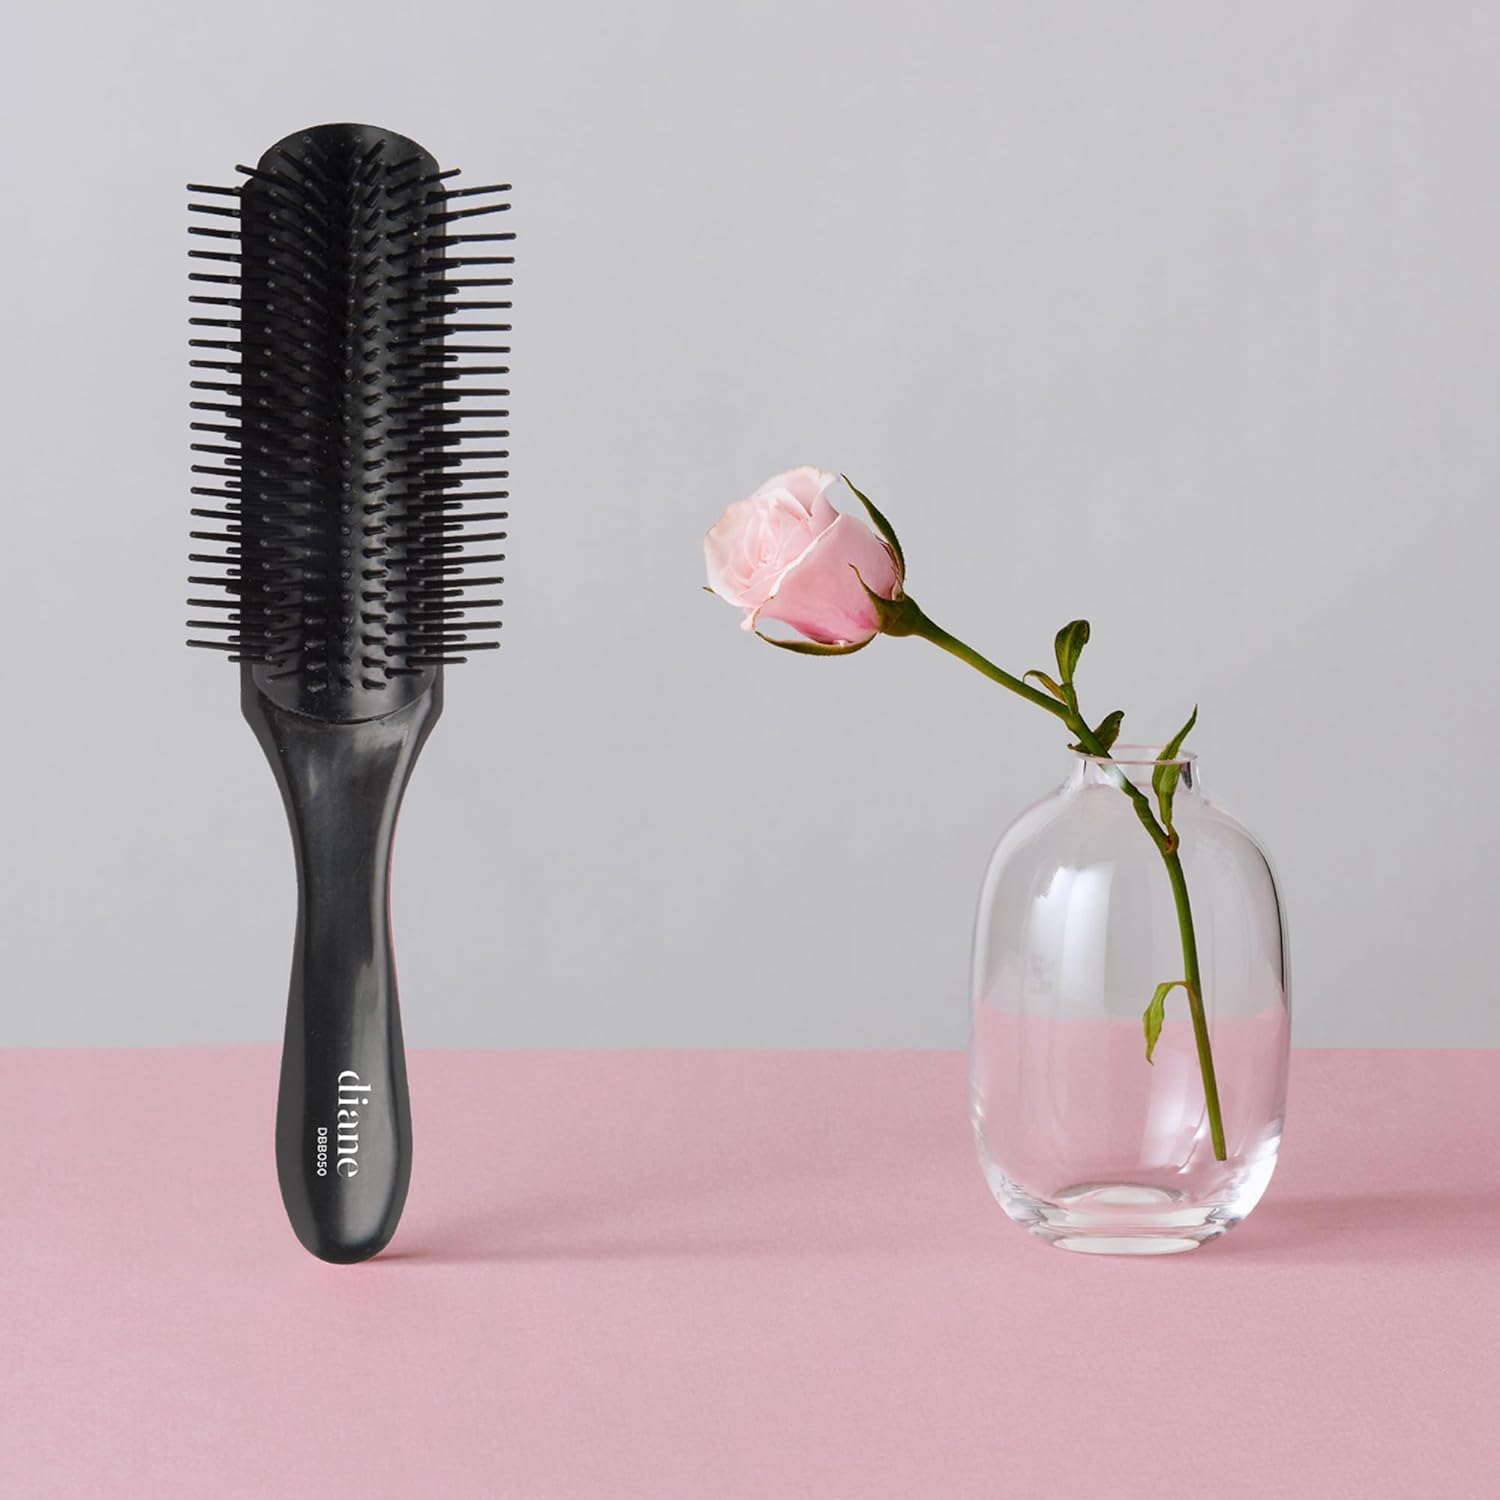 Diane Nylon Pin Styling Hair Brush for Detangling, Separating, Shaping and Defining Wet Thick or Curly Hair, Glides Through Tangles with Ease : Beauty & Personal Care